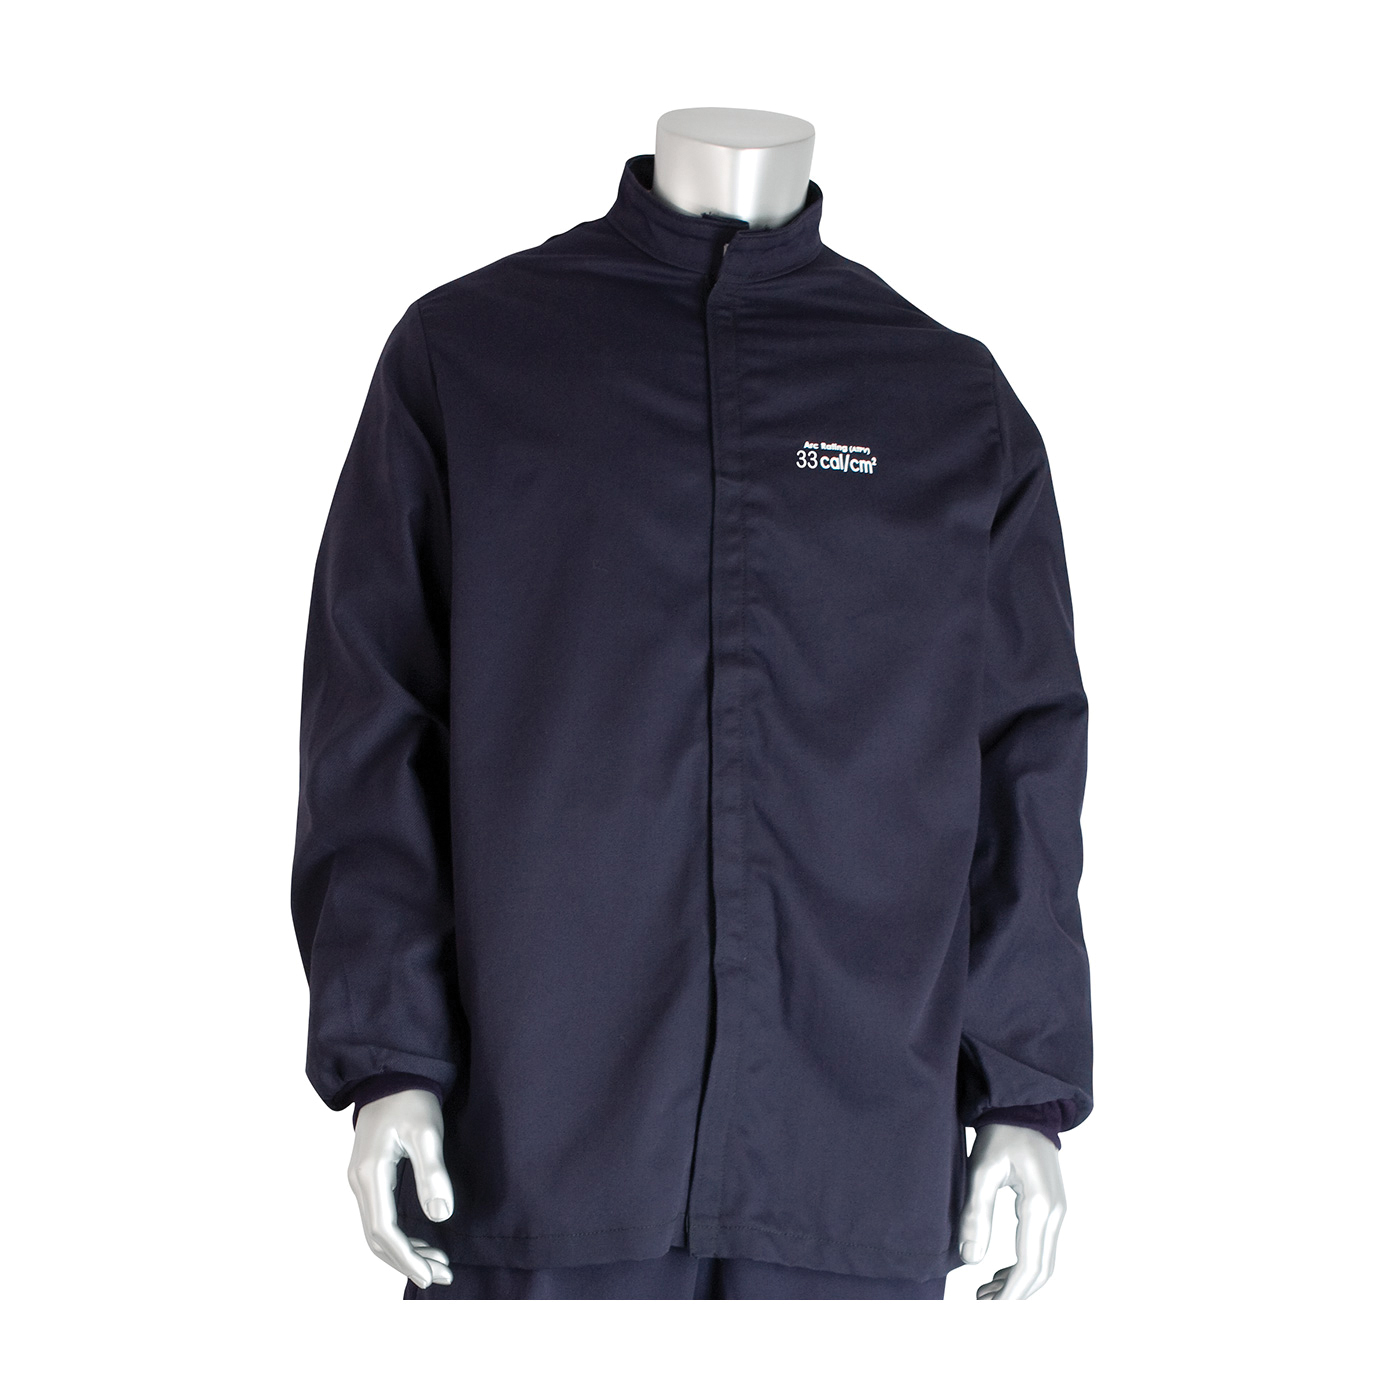 PIP® 9100-52680/S Arc and Flame Resistant Jacket, S, Navy, Westex® UltraSoft® 88% Cotton 12% High Tenacity Nylon, 36 to 38 in Chest, Resists: Arc and Flame, ASTM F1506-10a, ASTM F2178-12